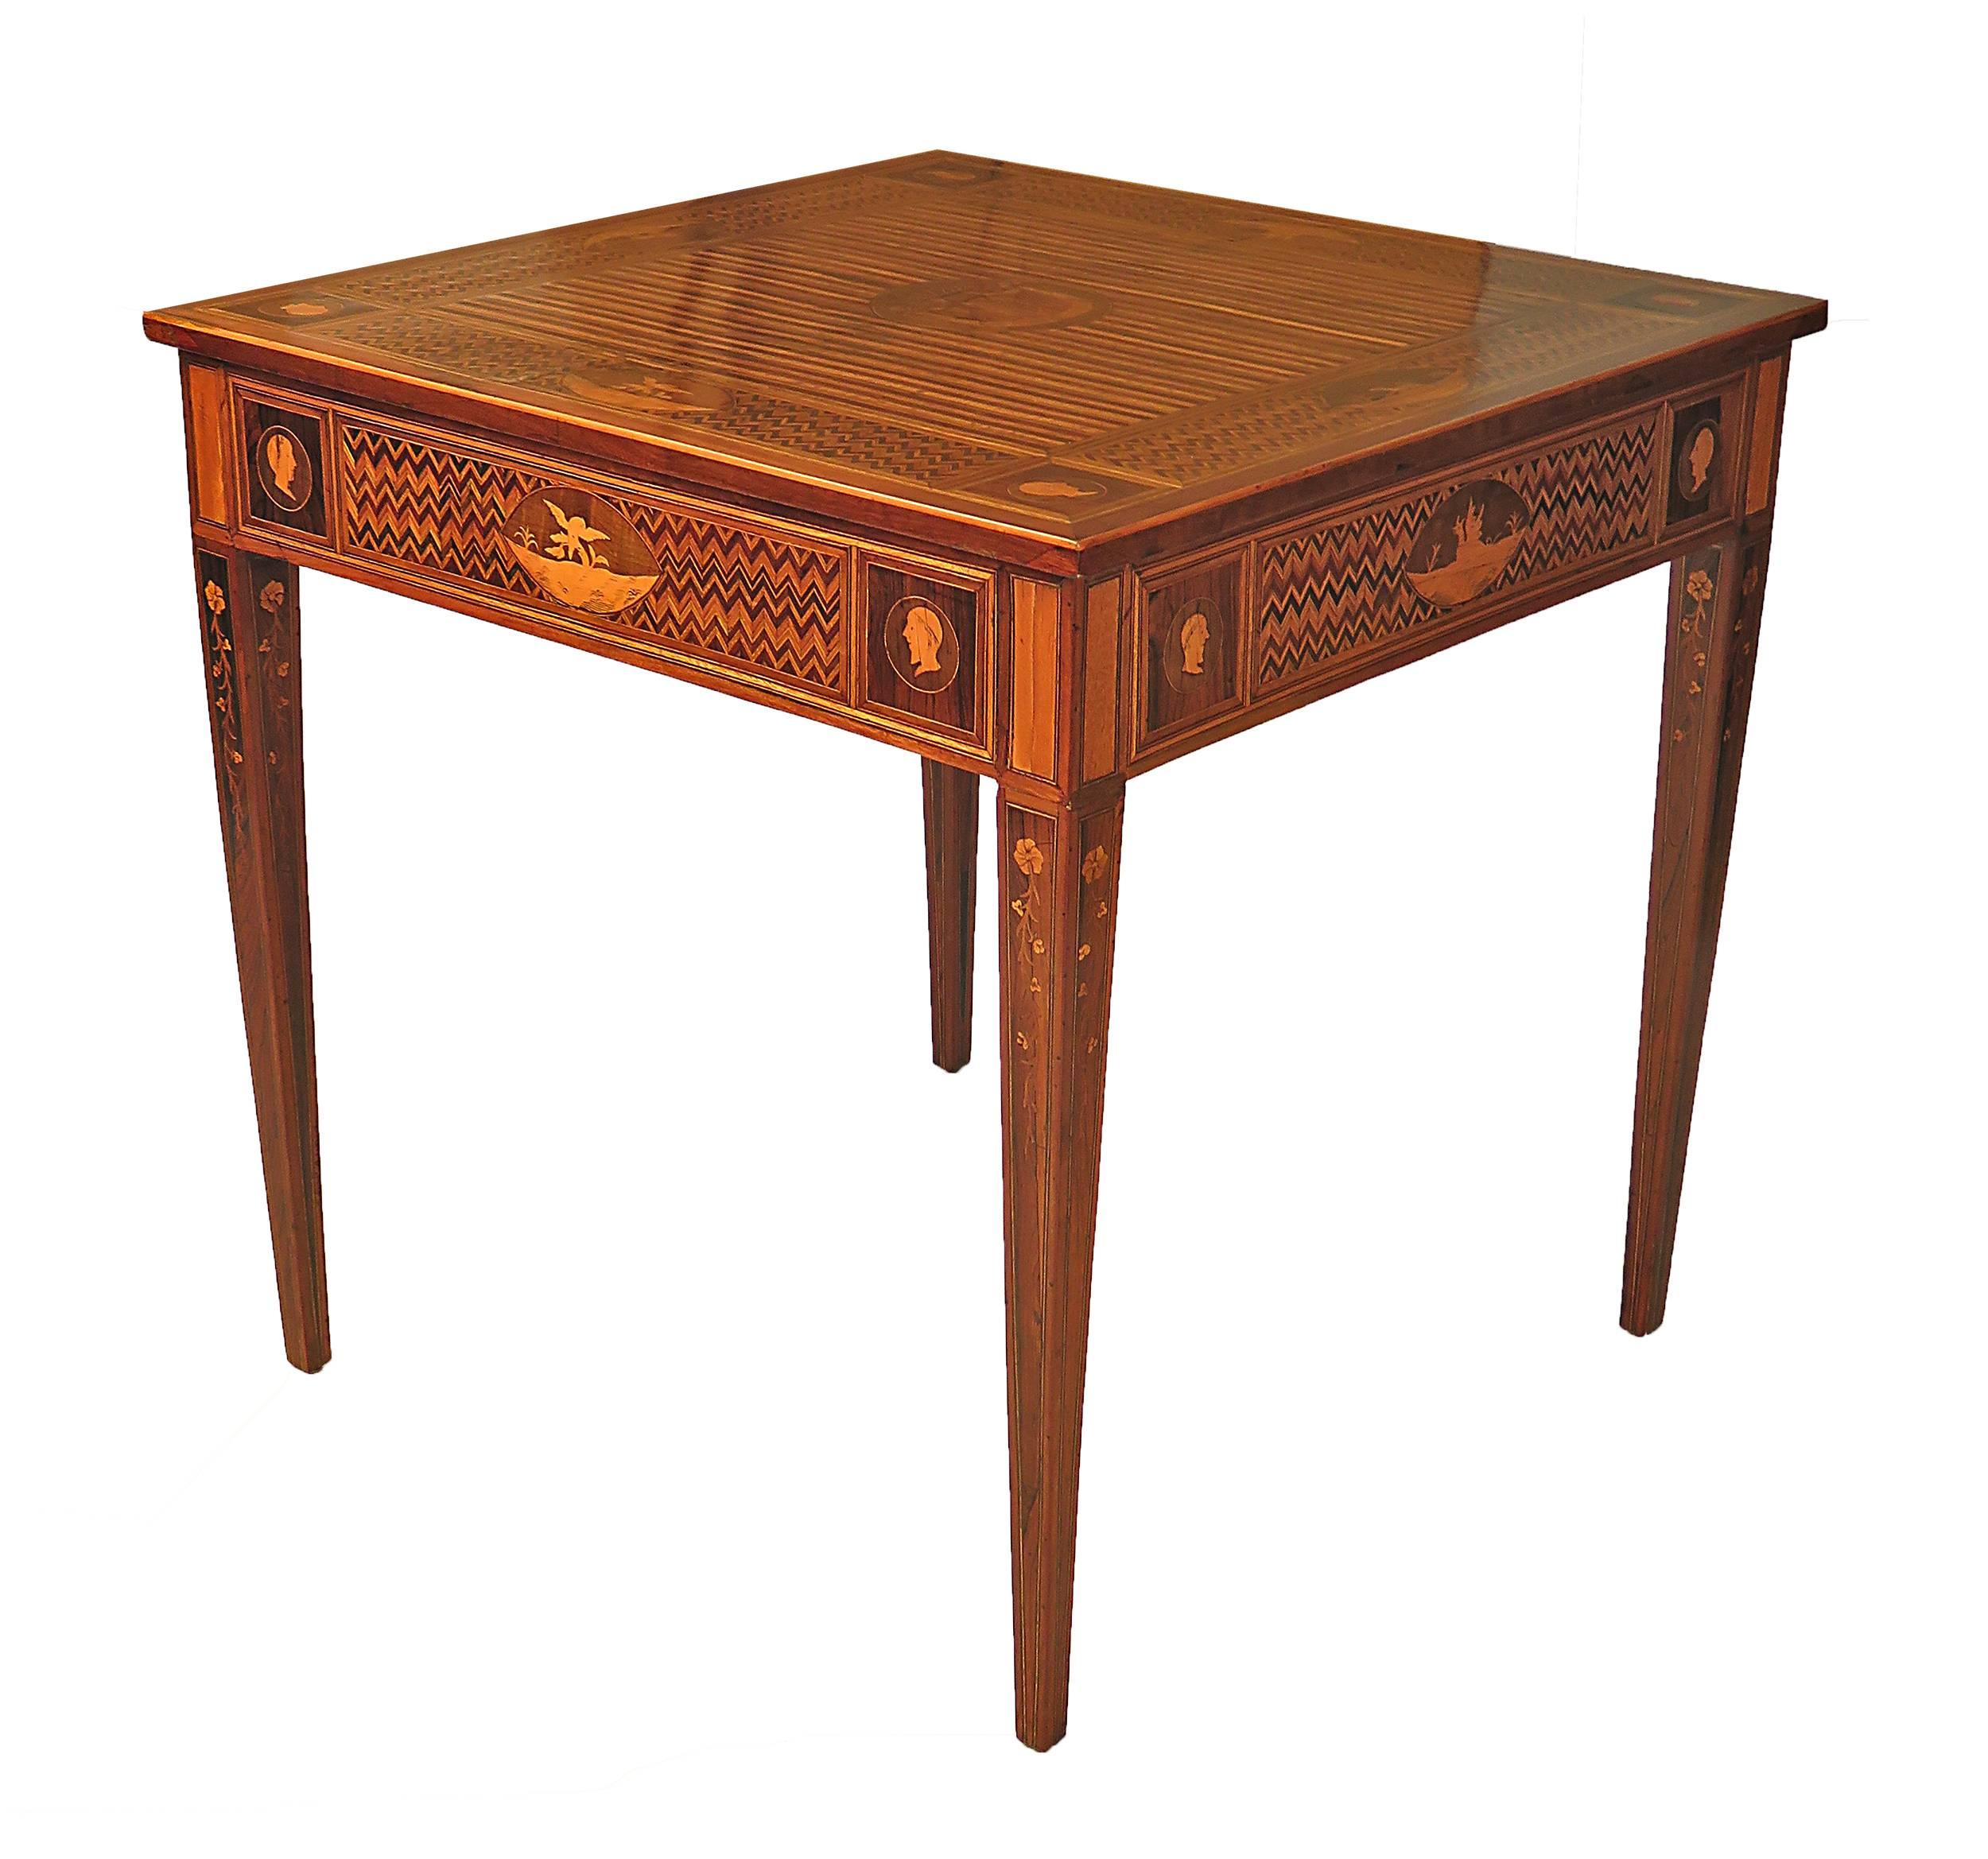 The richly inlaid surface of this useful Italian neoclassical square table suggest the work of Magiolini or possibly the work of someone greatly influenced by his designs. Pieces like these exists in fairly small numbers. The inlay was very labor